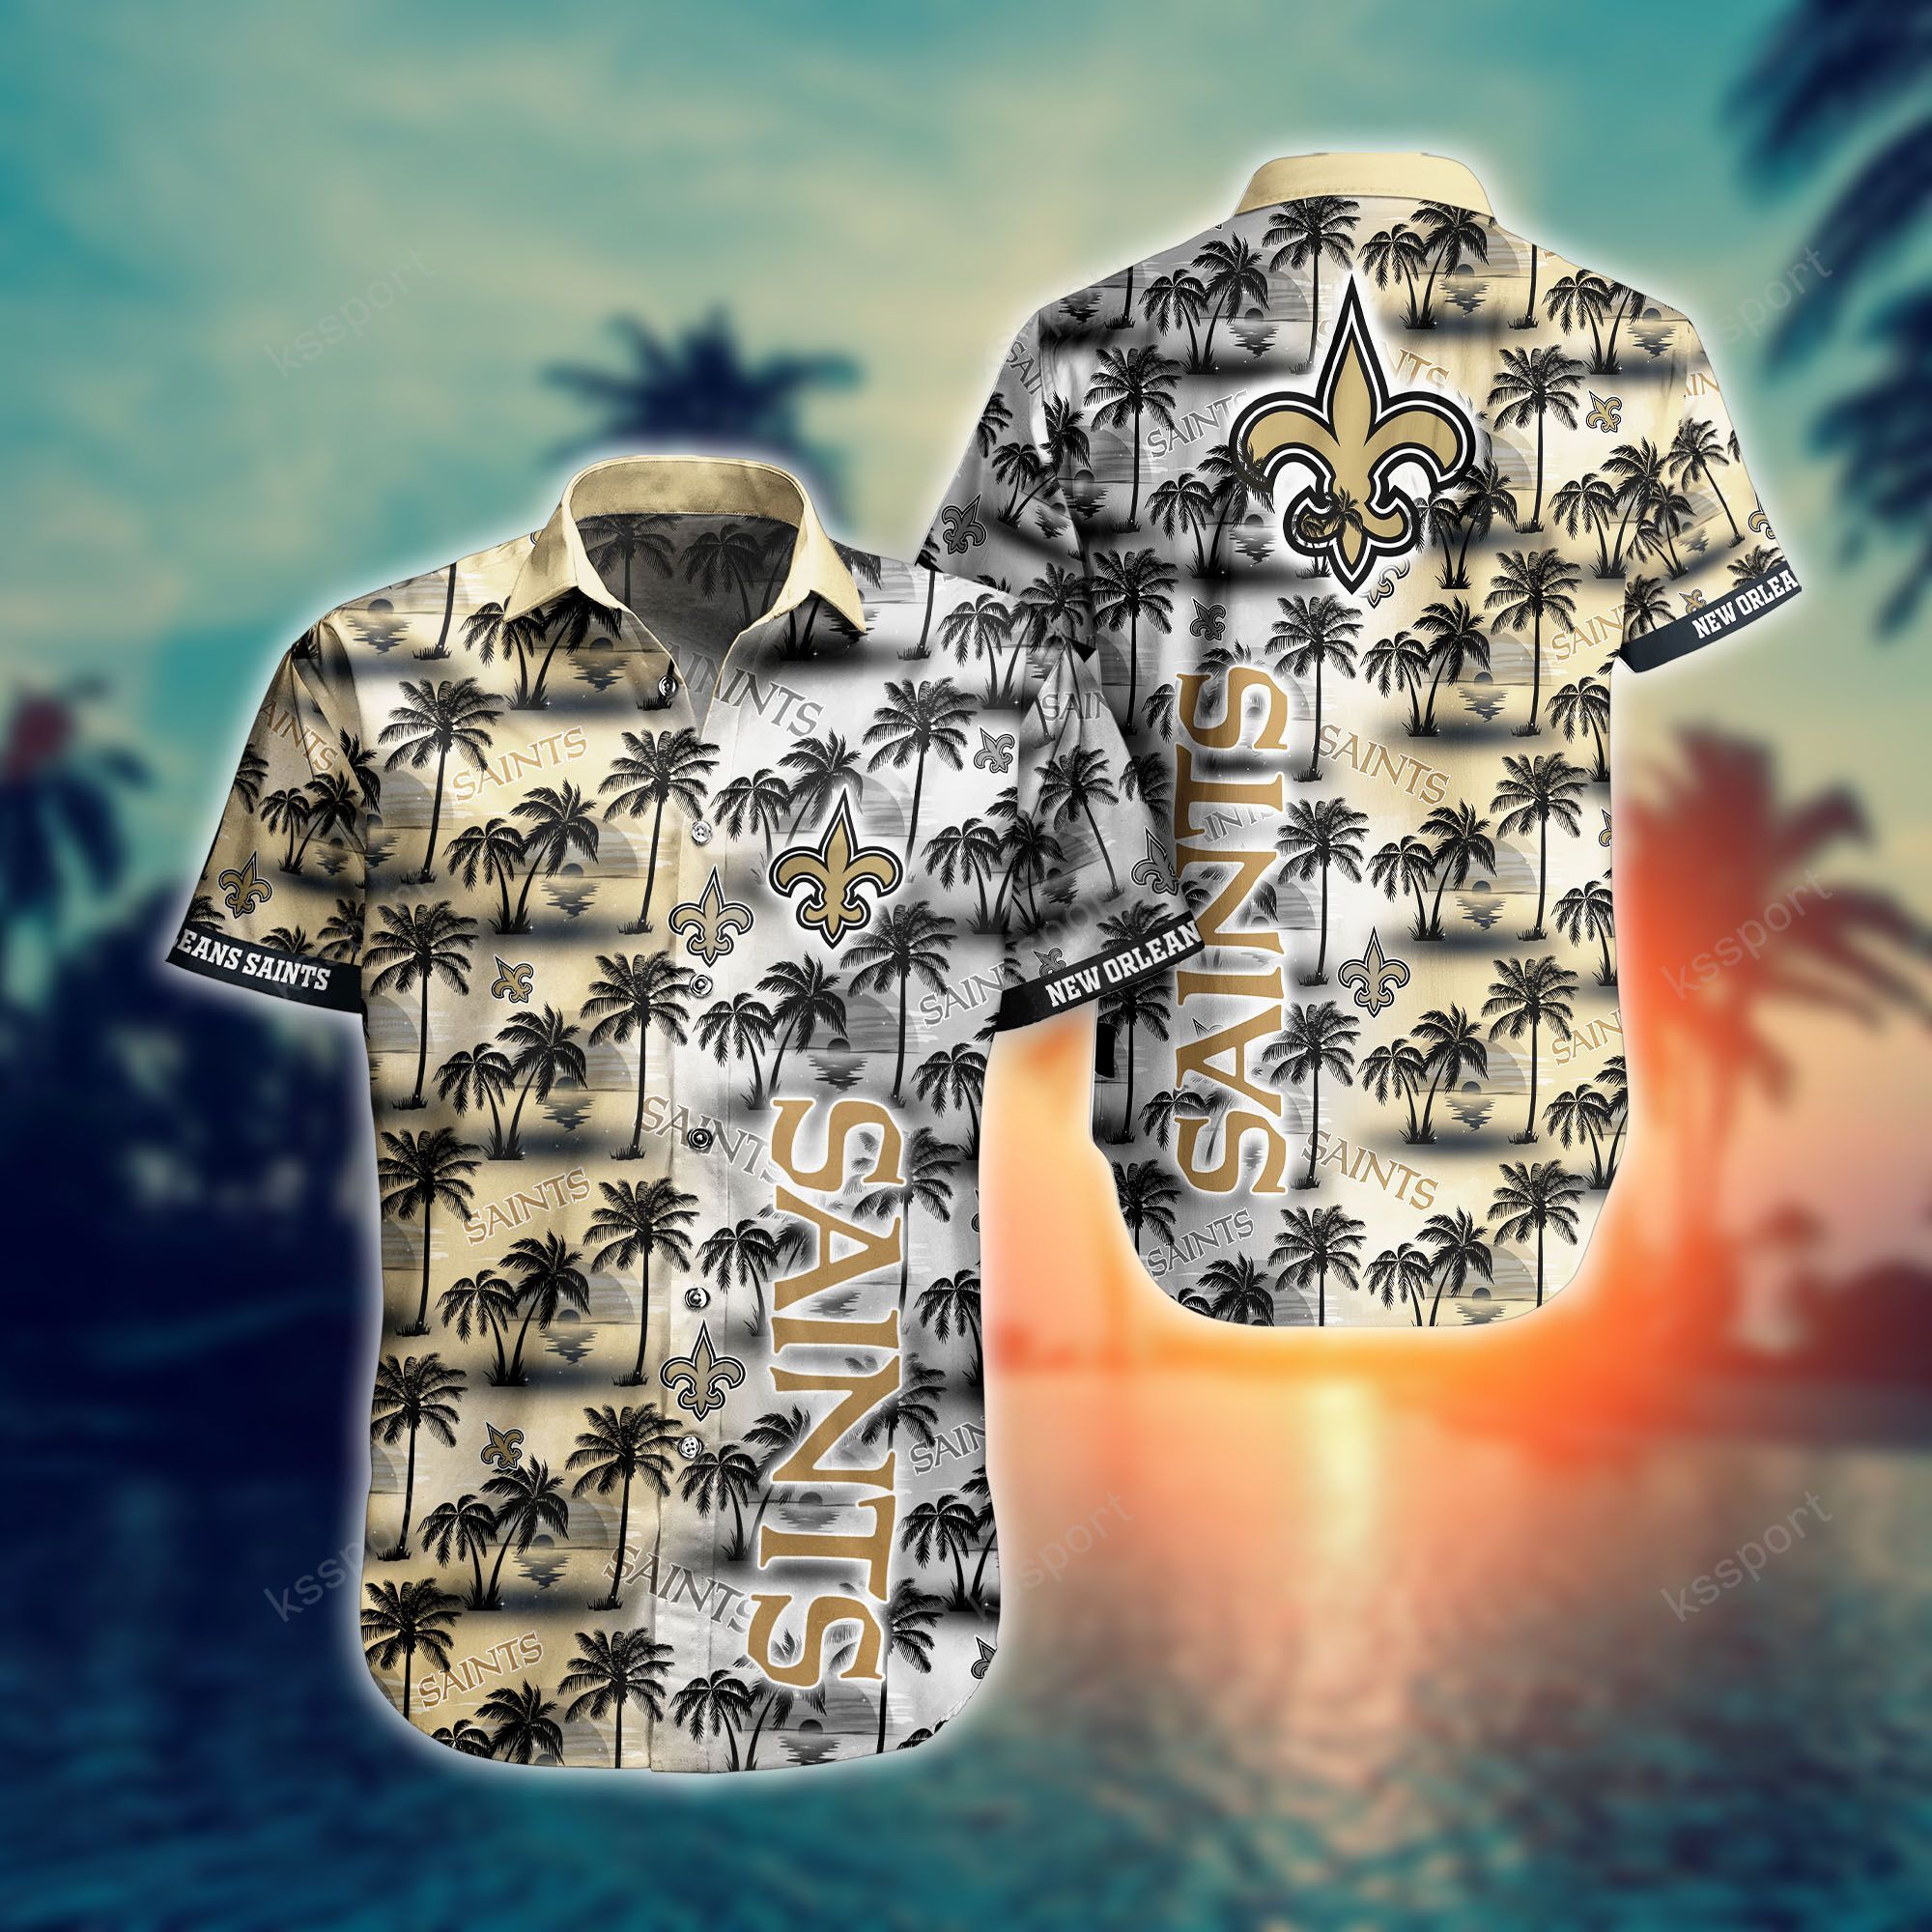 Treat yourself to a cool Hawaiian set today! 87